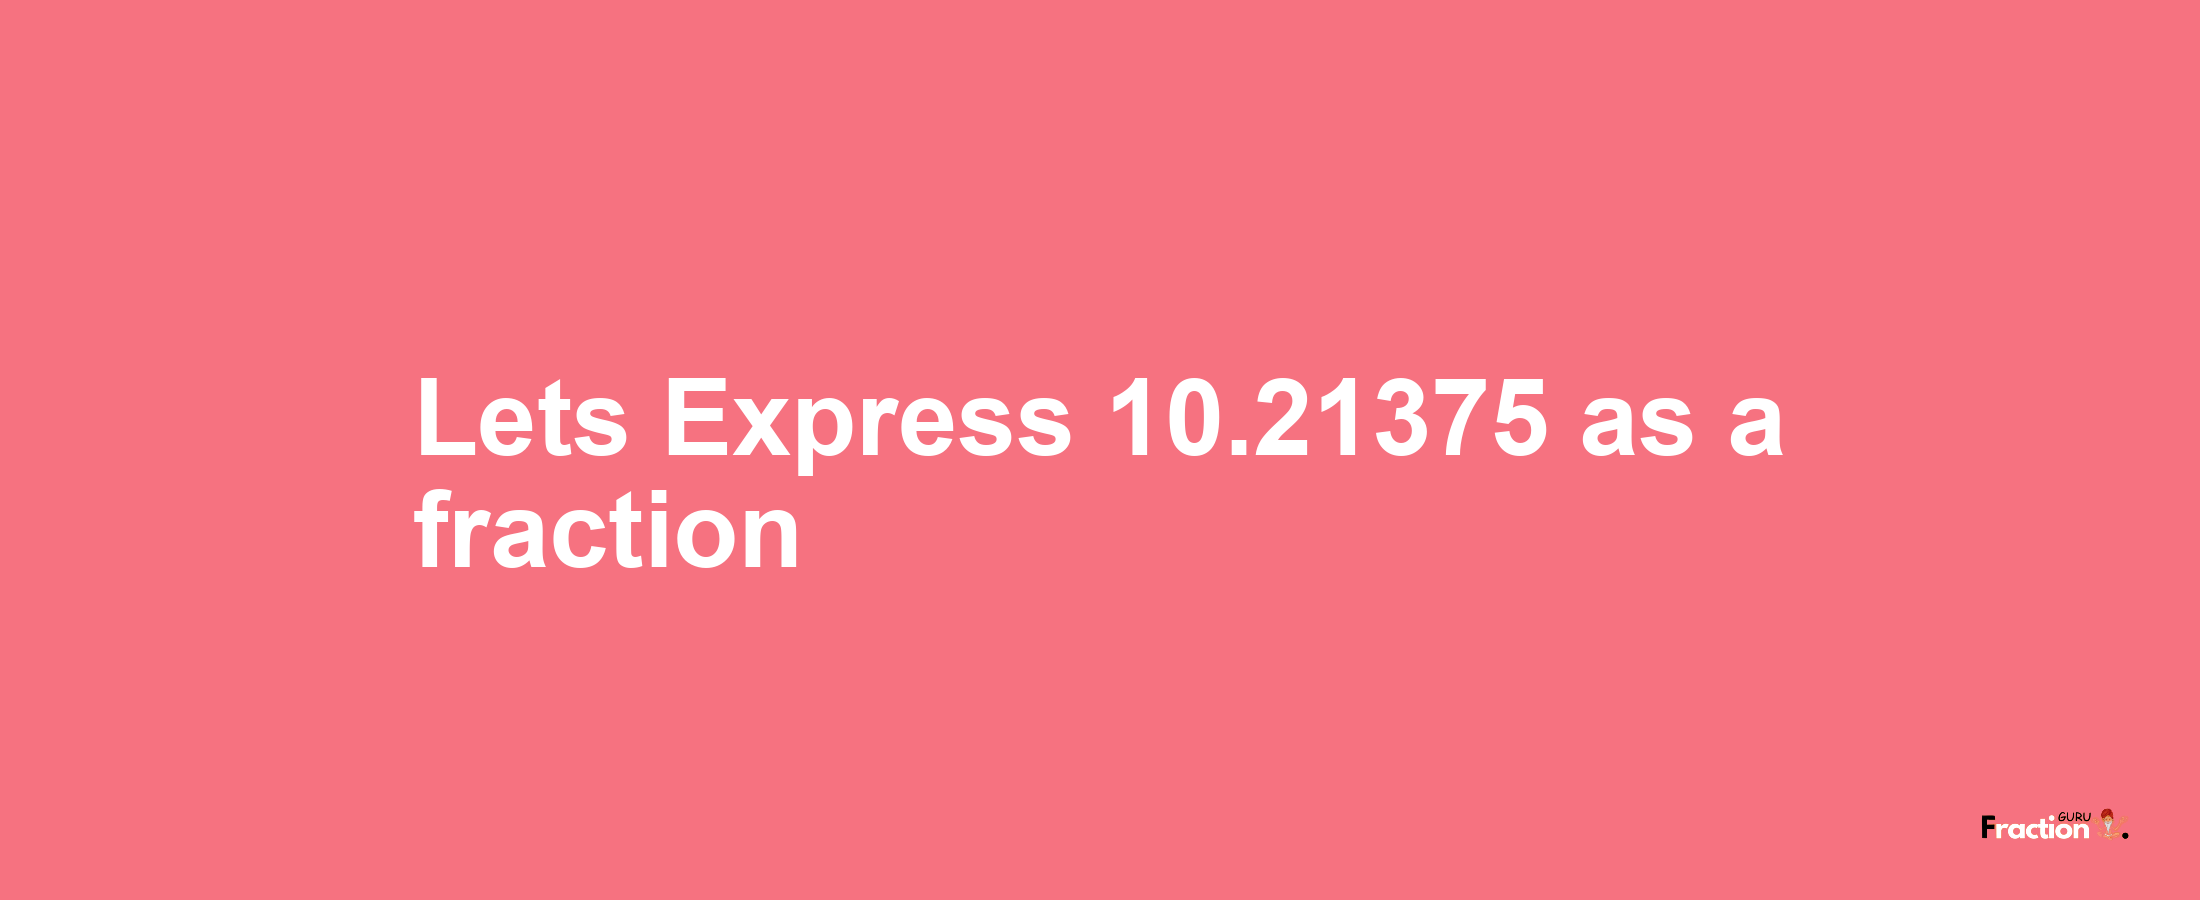 Lets Express 10.21375 as afraction